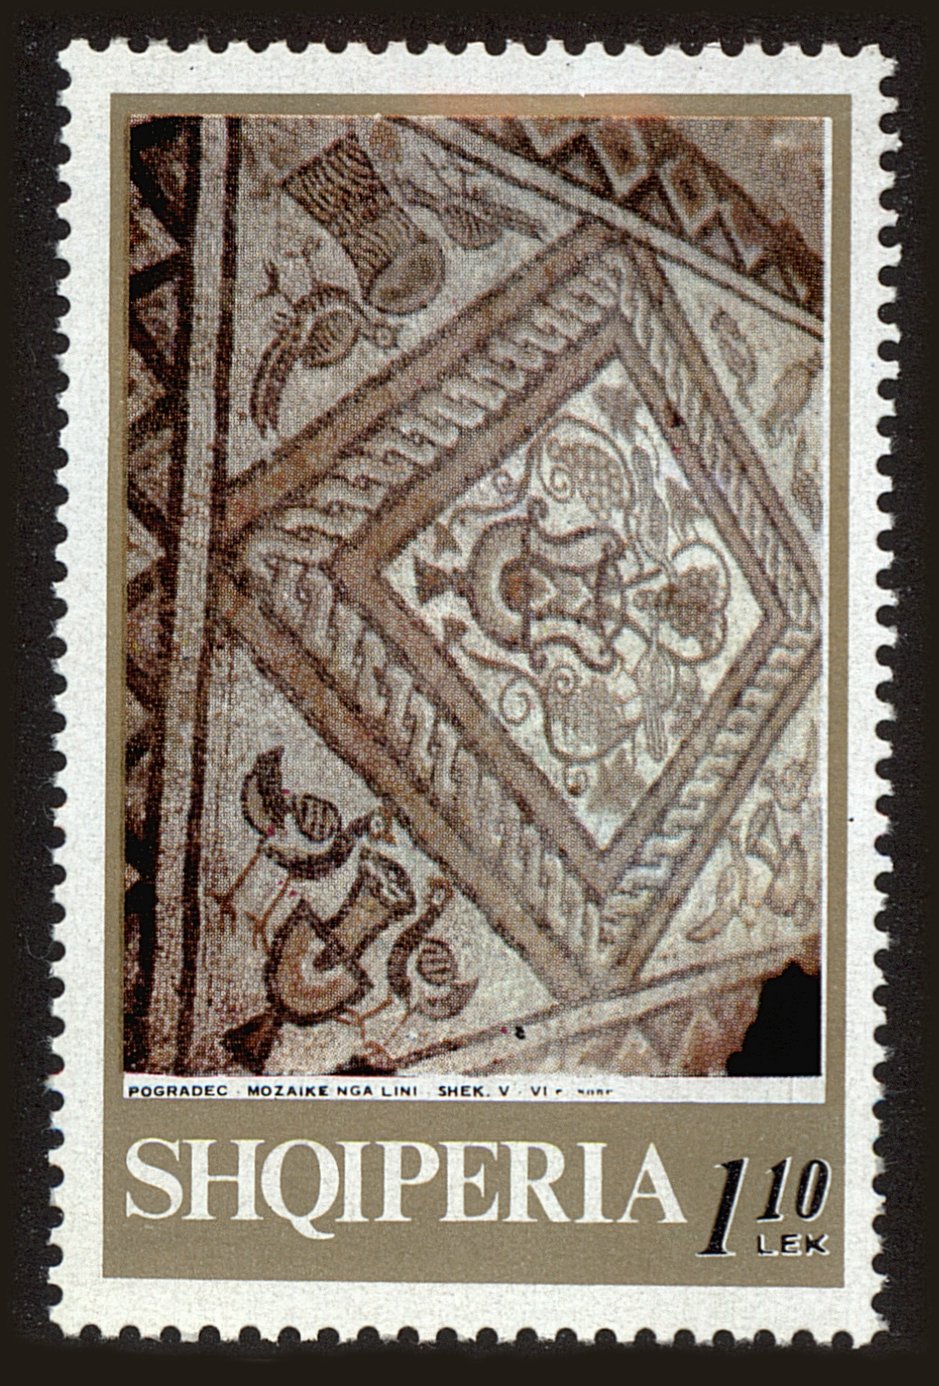 Front view of Albania 1271 collectors stamp